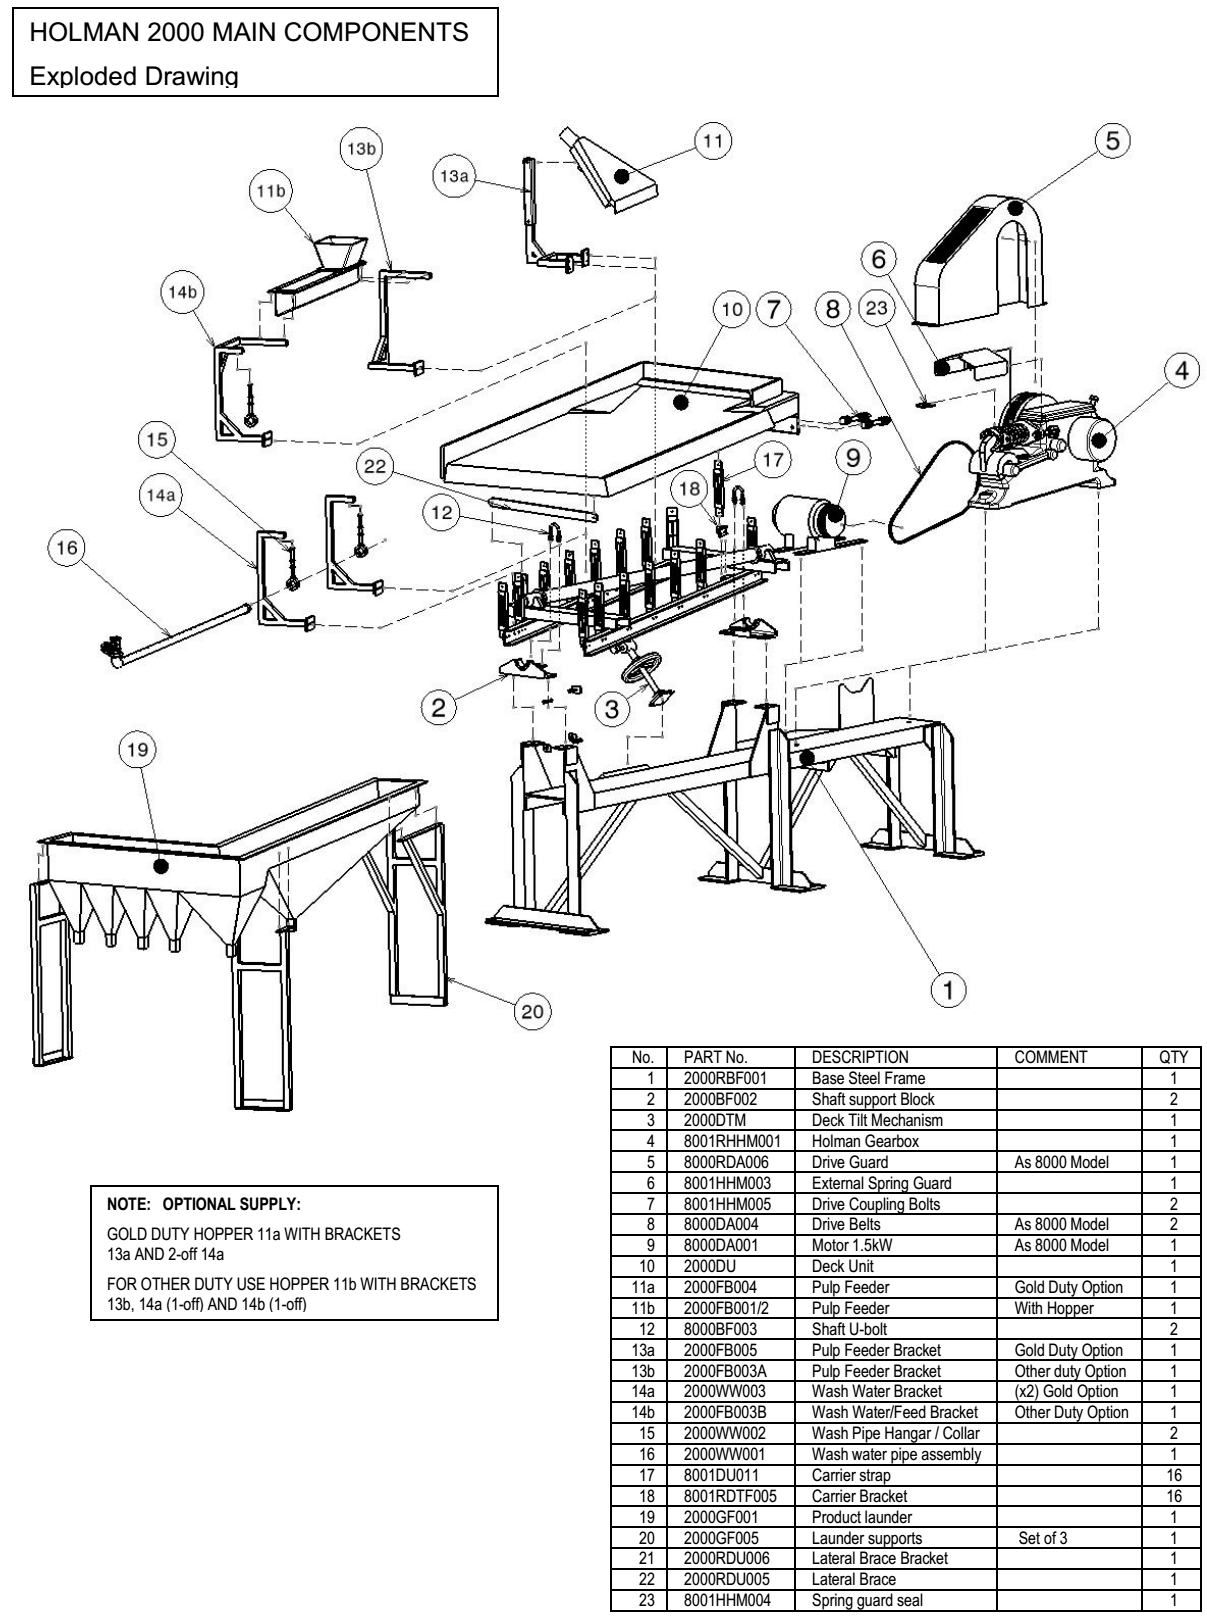 Wilfley Shaker Table Main Components